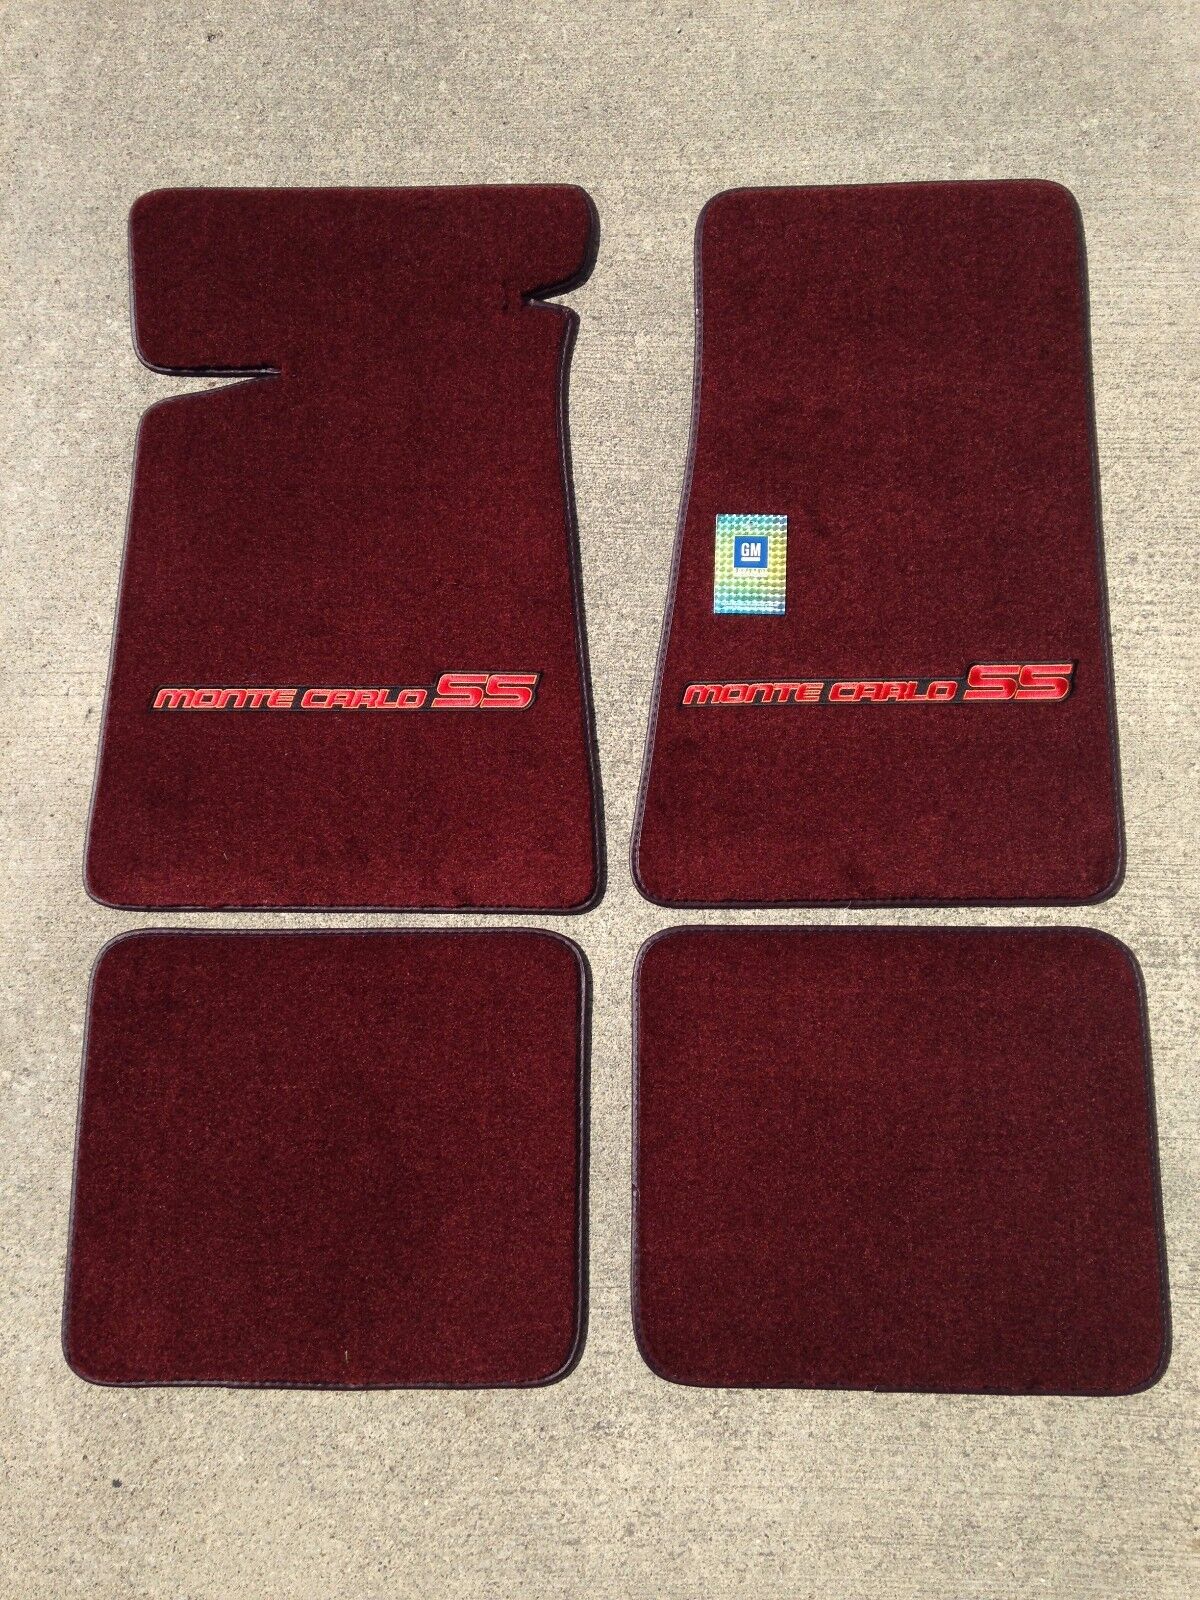 Carpeted Floor Mats - Small Red Monte Carlo SS on Maroon Mats